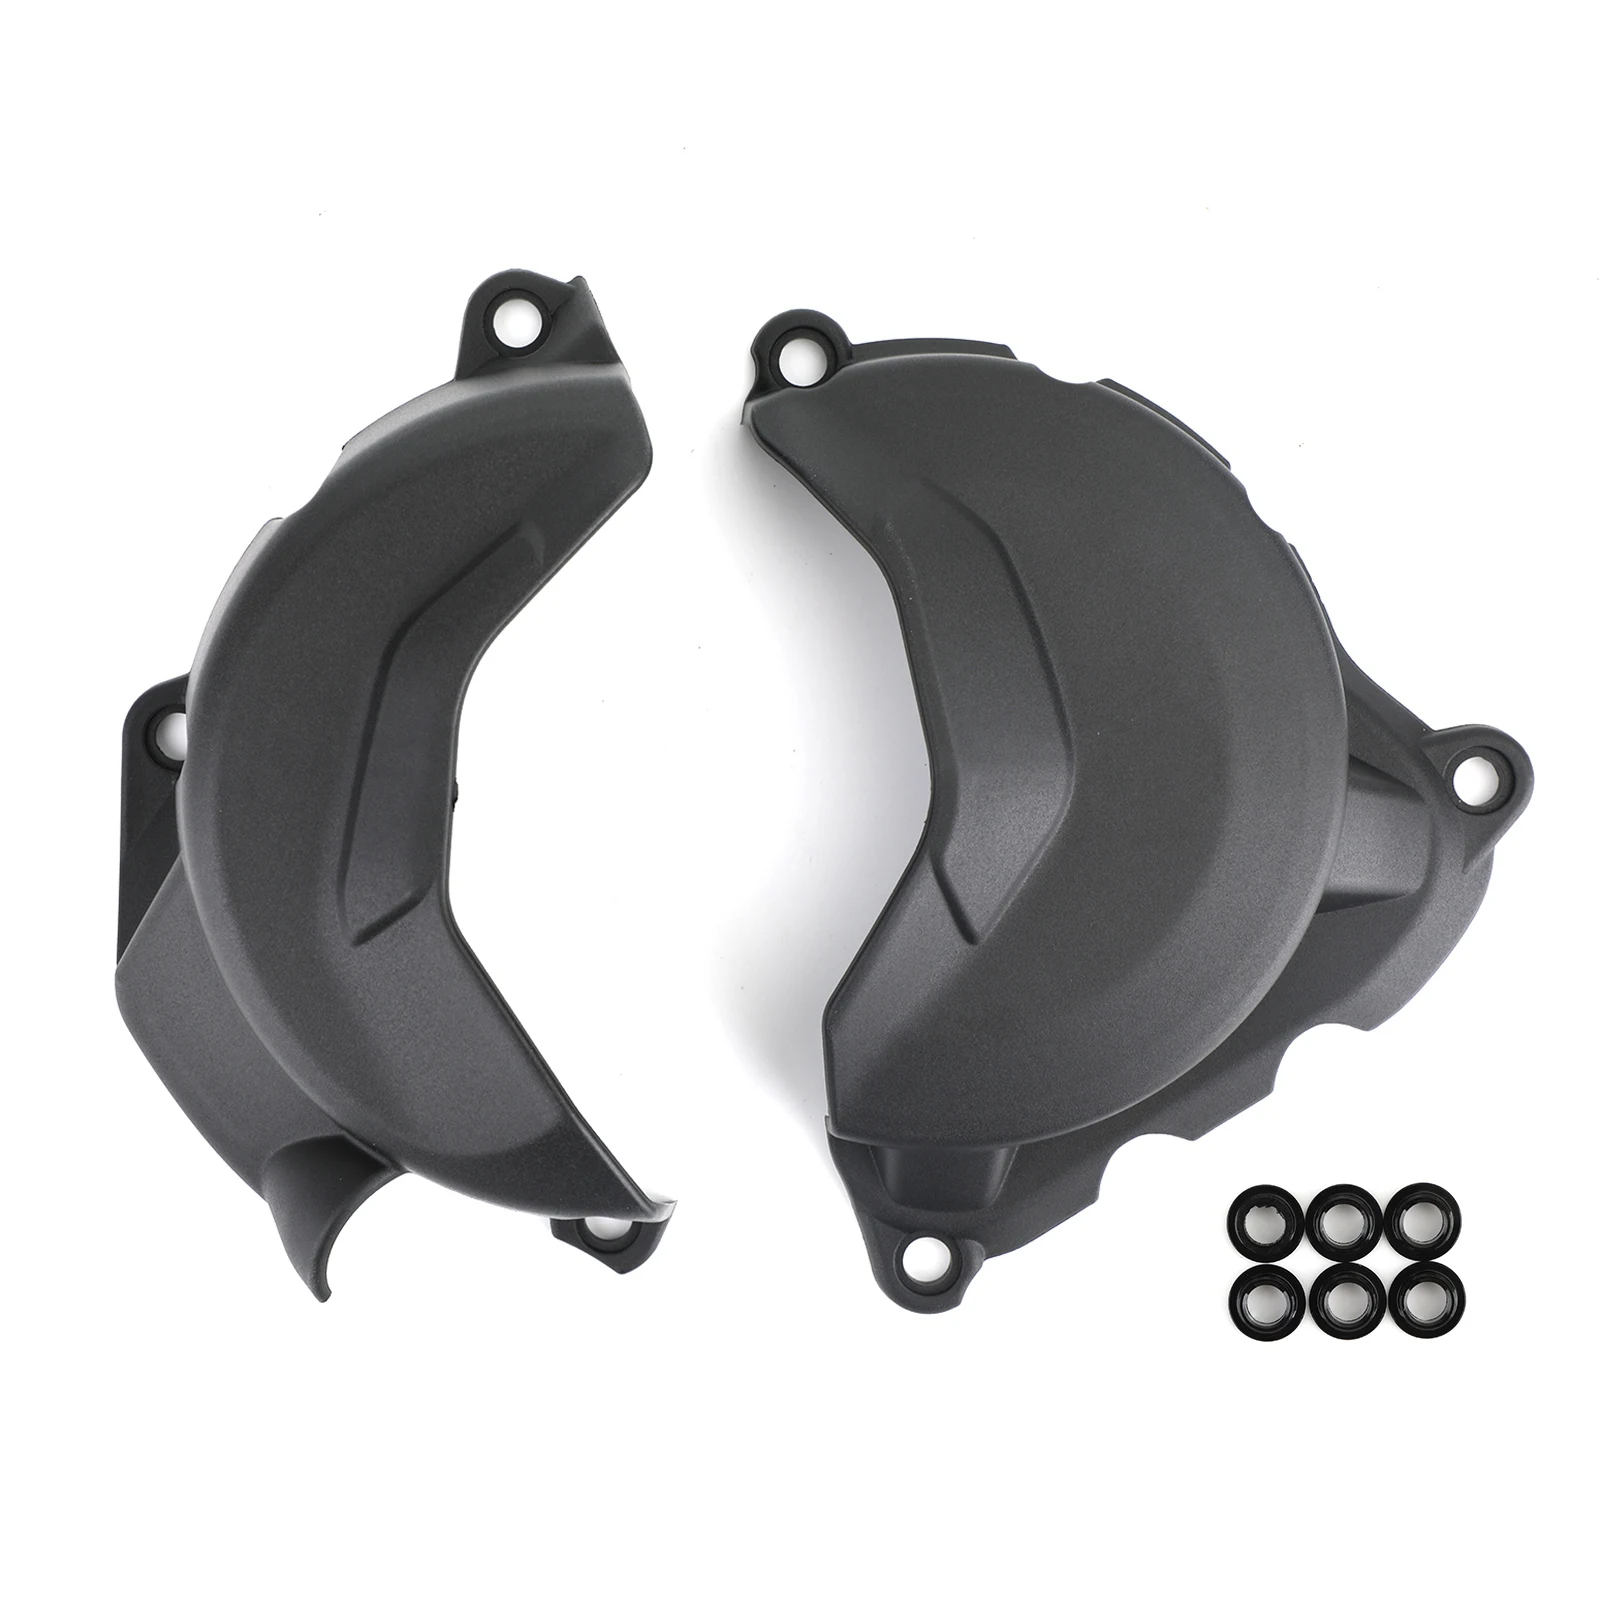 

Areyourshop ENGINE GENERATOR CLUTCH COVER PROTECTION Fit for BMW F750GS F850GS 2018-2020, Black